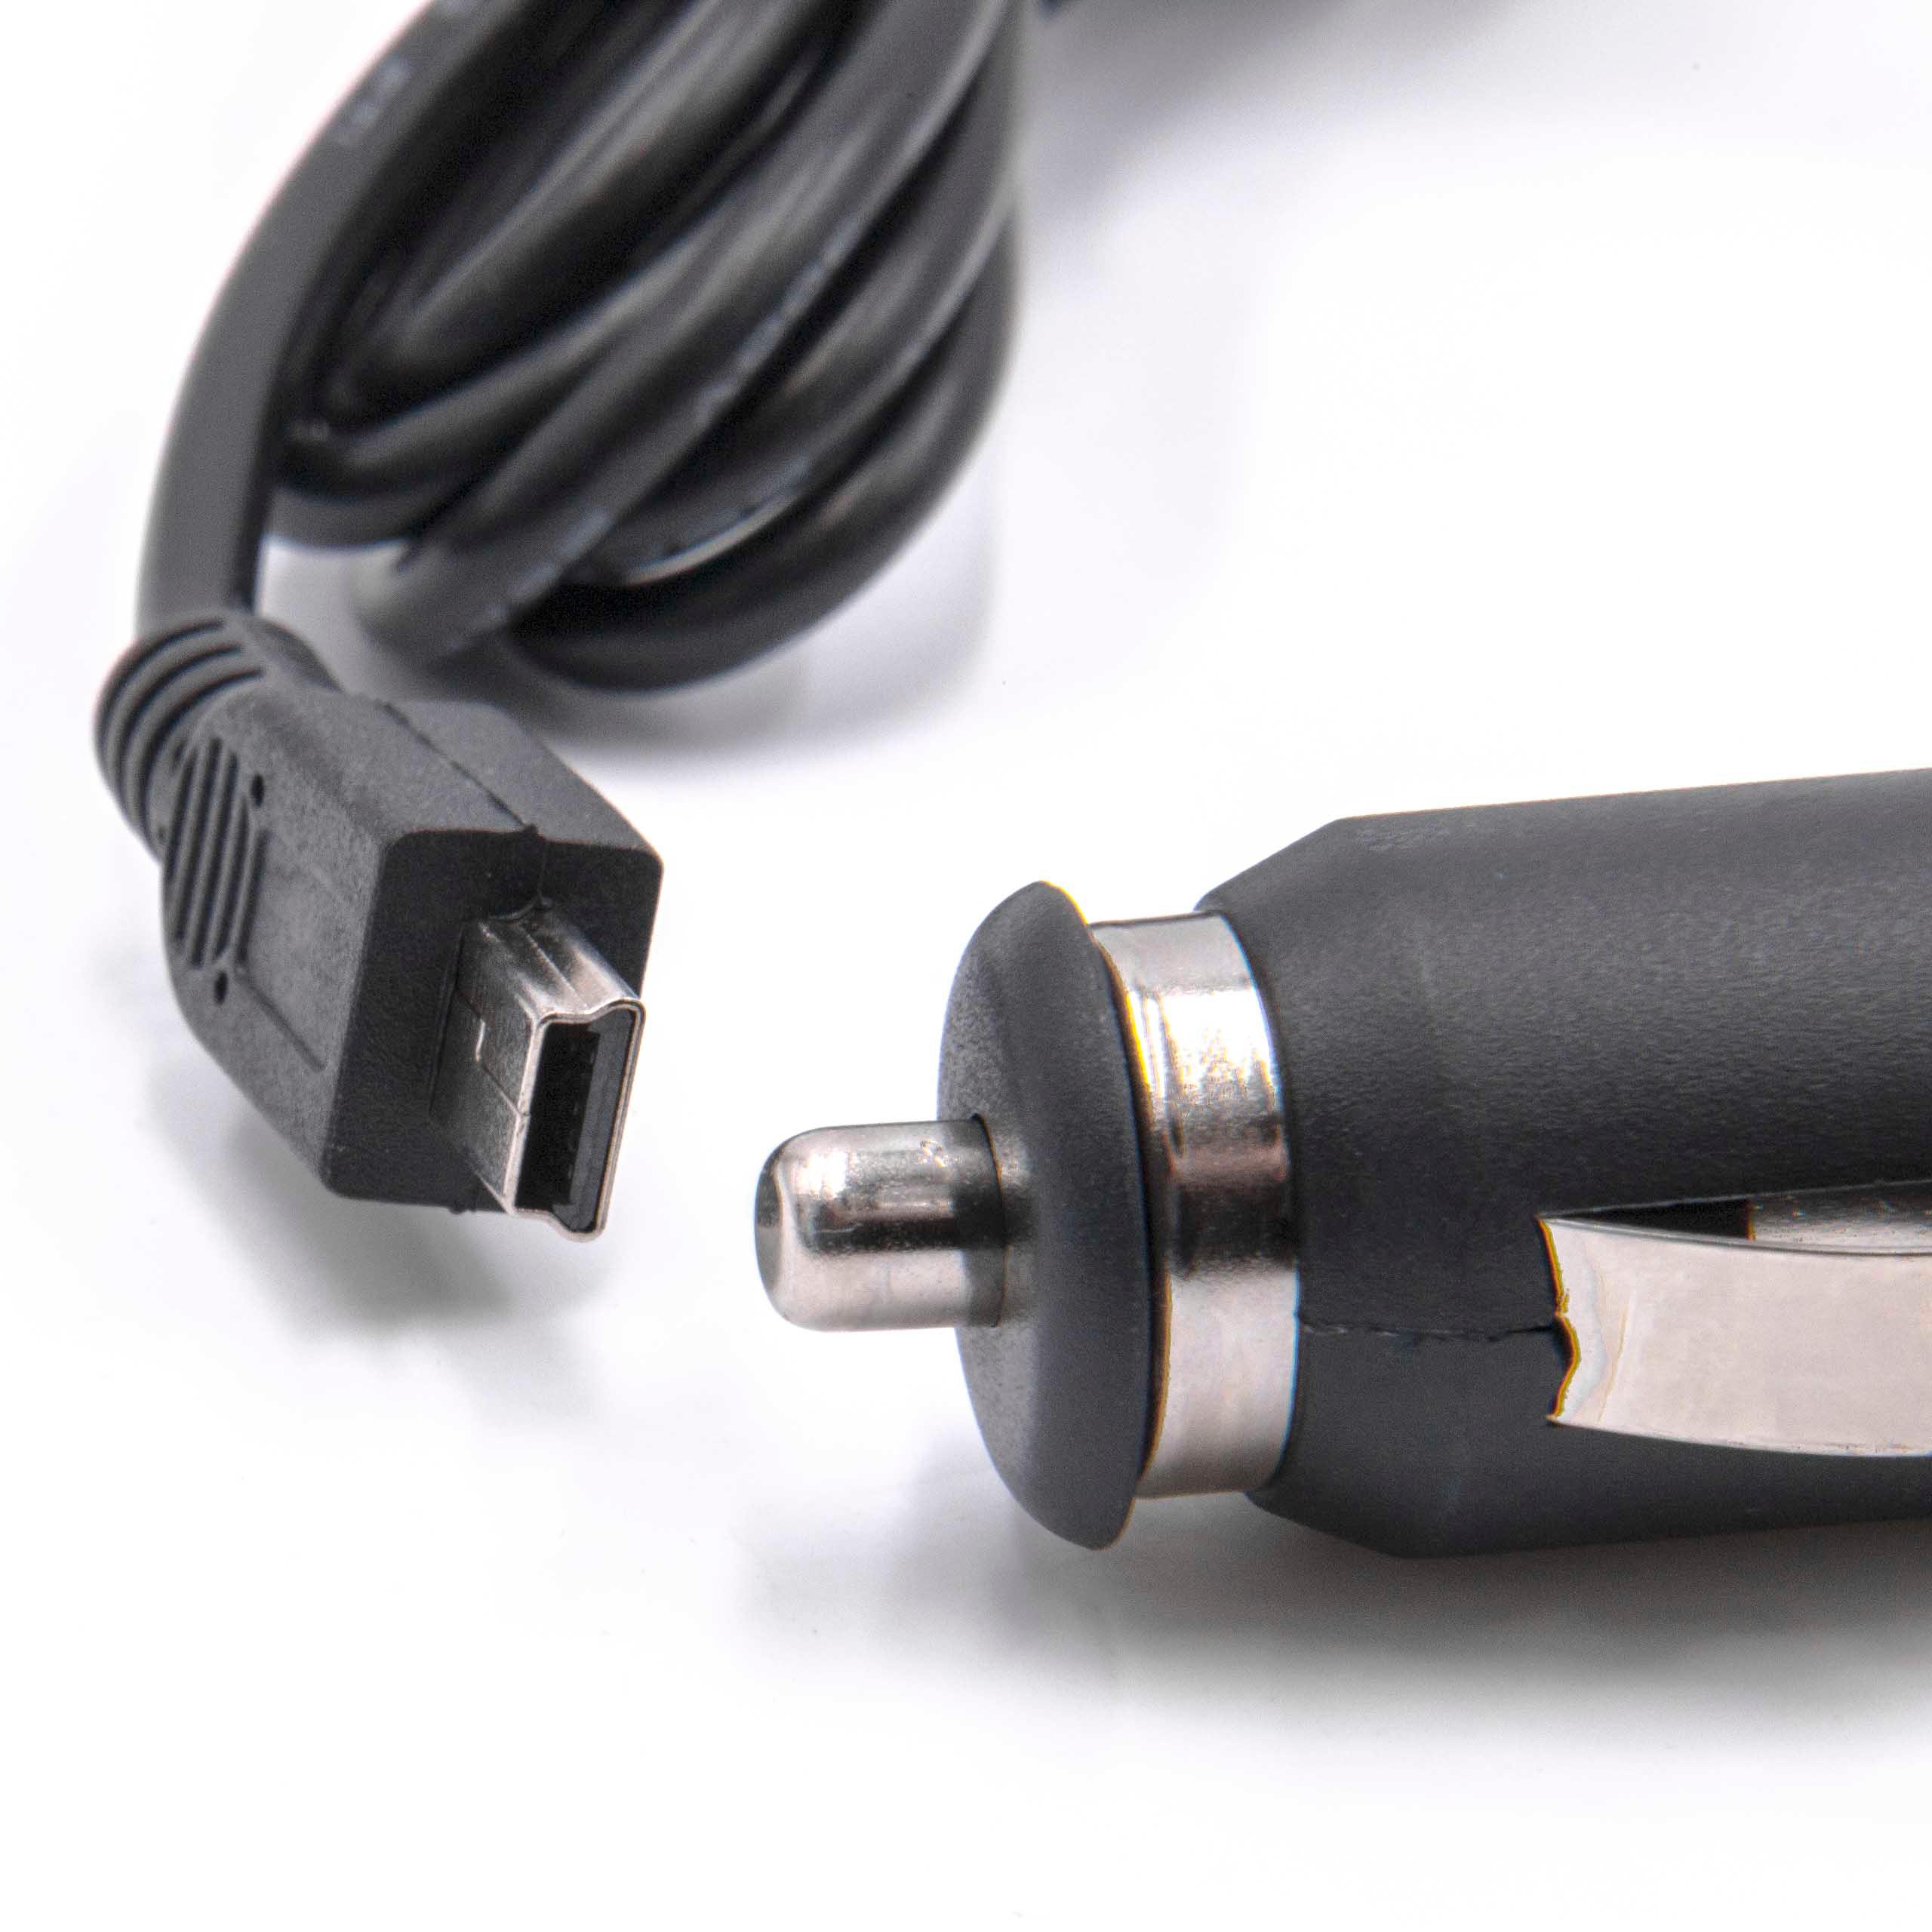 Mini-USB Car Charger Cable 1.0 A suitable forDevices like GPS, Sat Navs